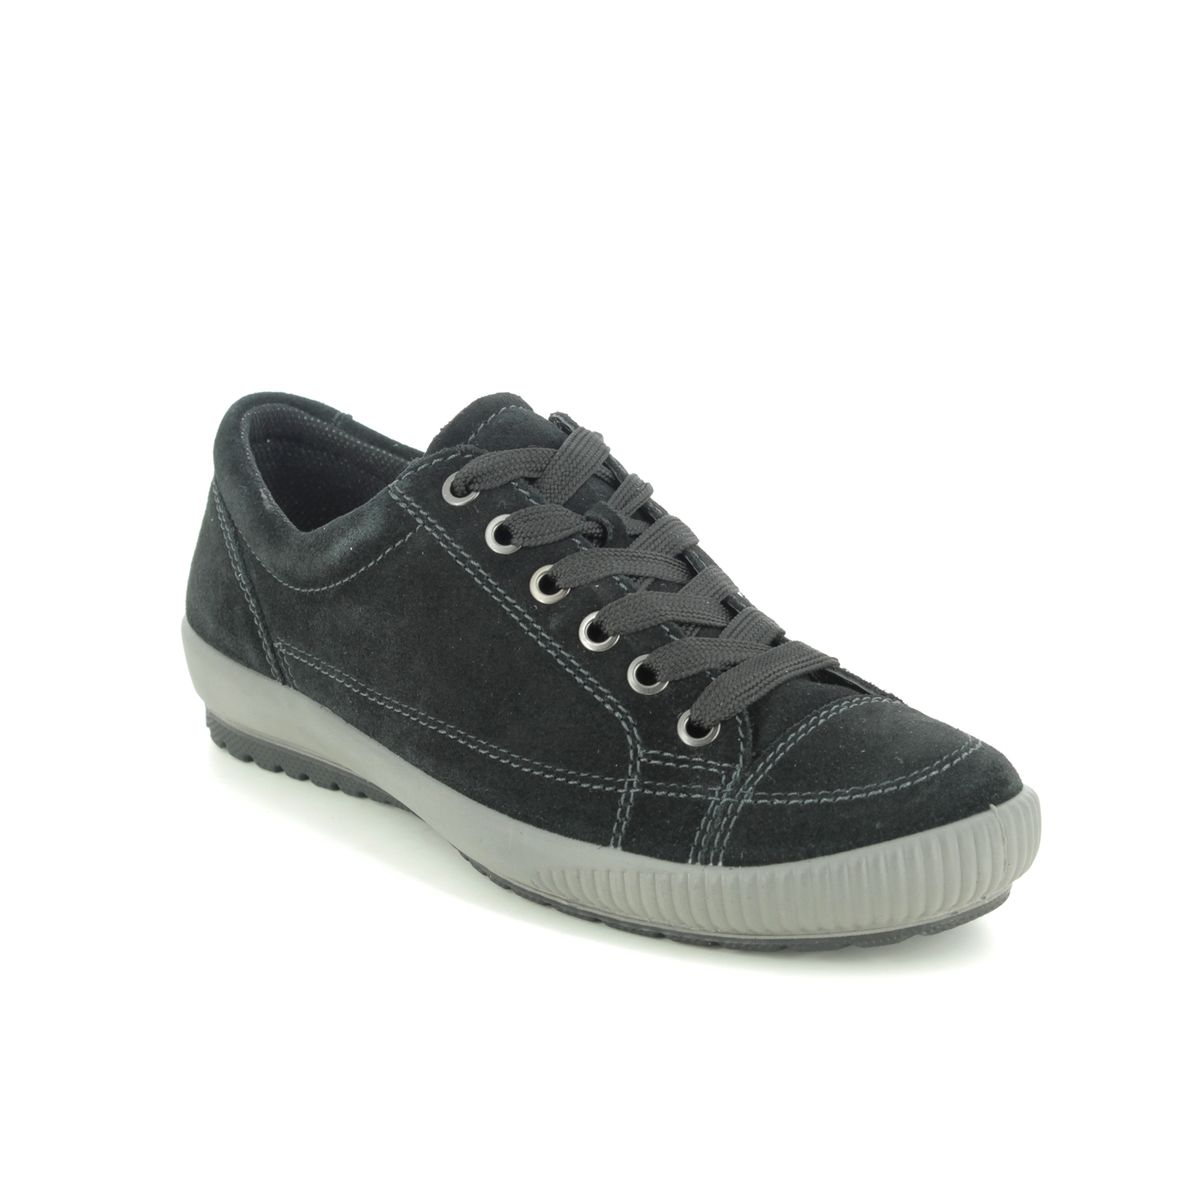 Legero Tanaro Stitch Black Suede Womens Lacing Shoes 0800820-0000 In Size 4 In Plain Black Suede